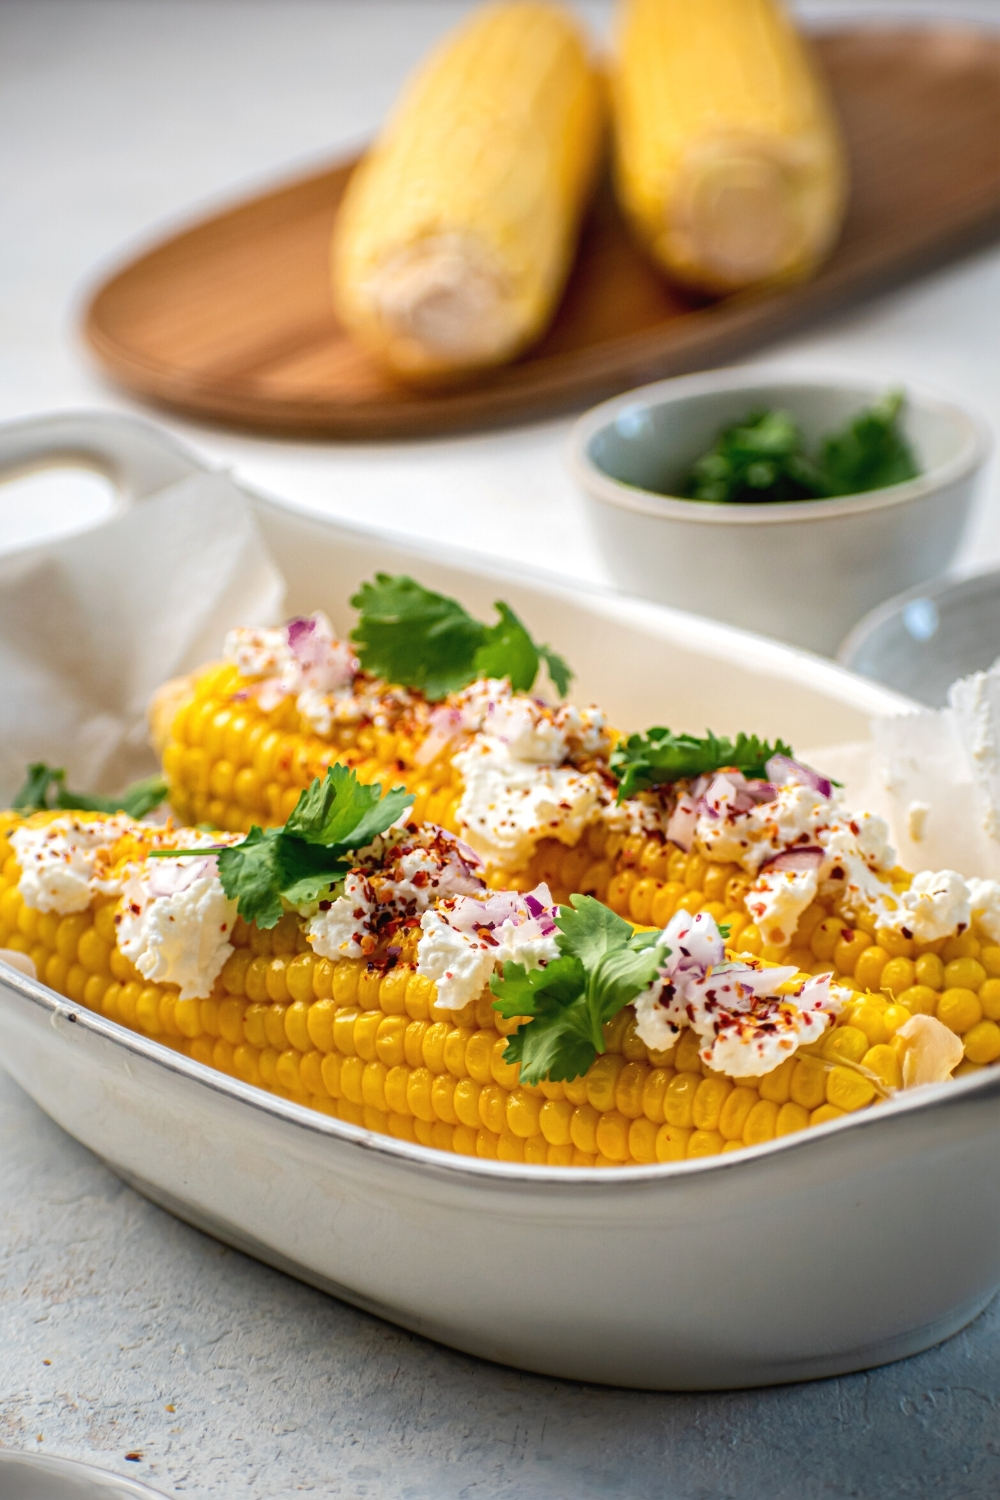 Two pieces of corn on the cob with Mexican queso fresco on top. Behind it is a bowl with cilantro and behind that a wooden board of two pieces of corn on the cob on it.